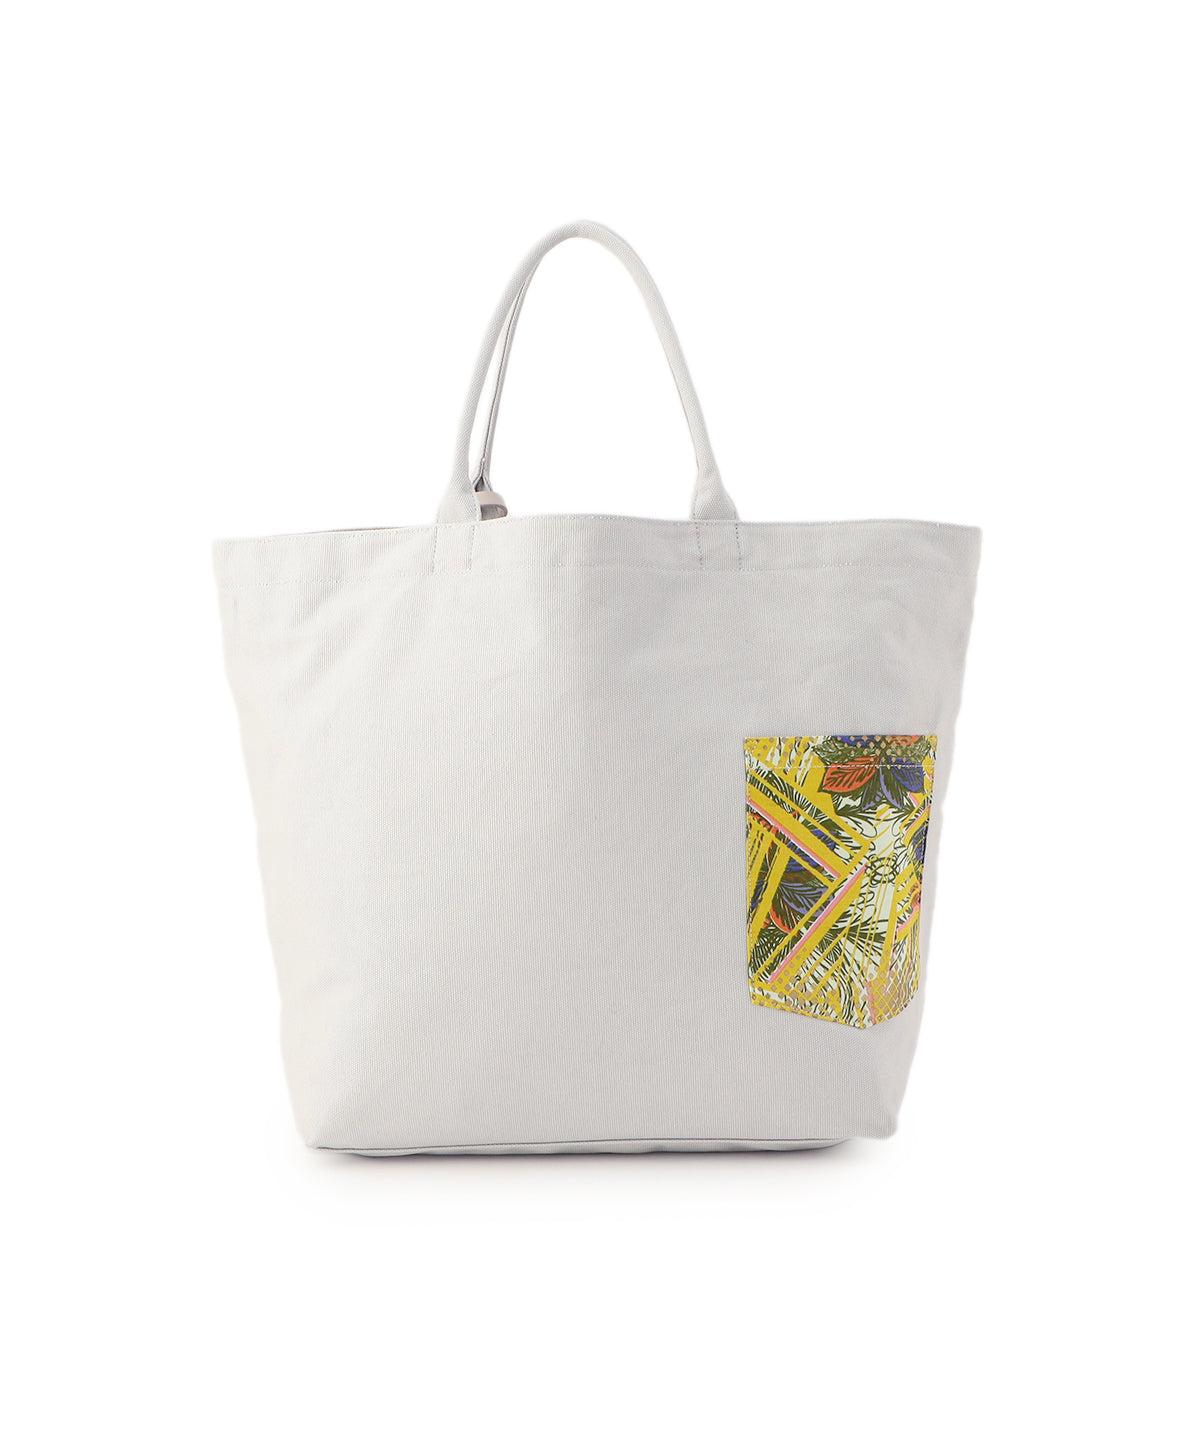 Colored Canvas Tote (Large) L.GRAY | バッグ | CLOUDY公式通販サイト